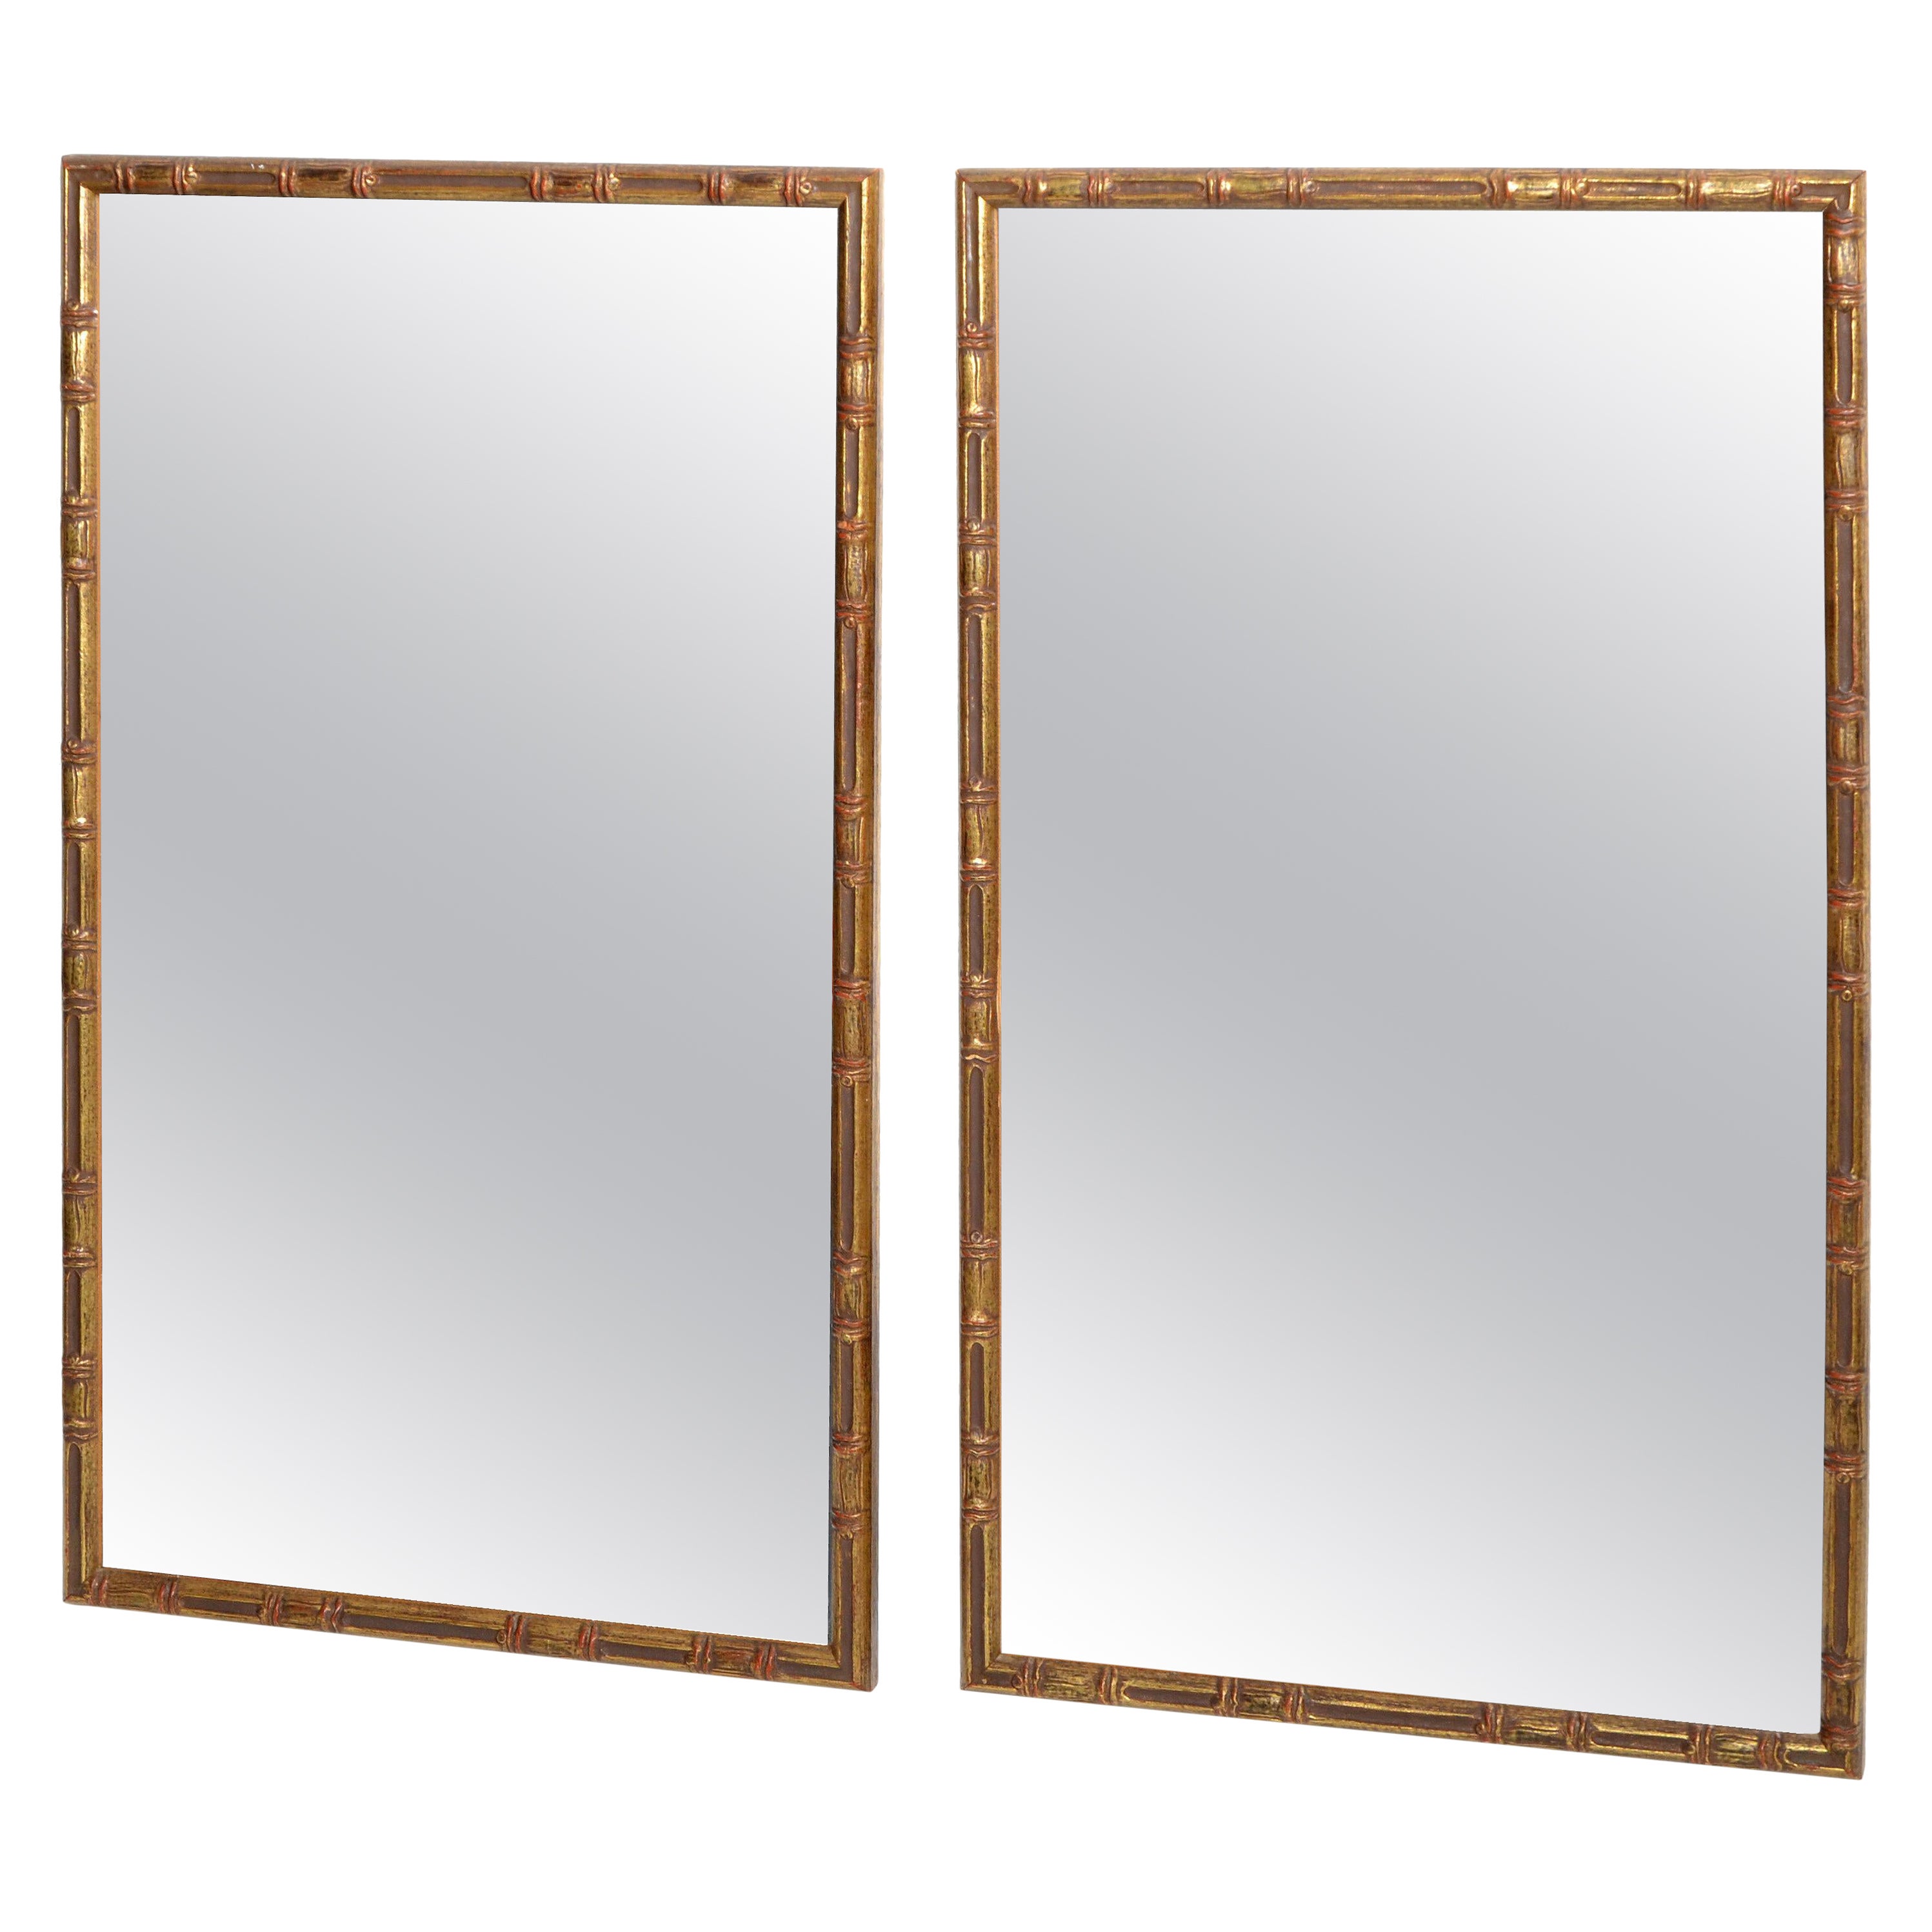 Pair of Hollywood Regency Gilt Faux Bamboo Wall Mirror